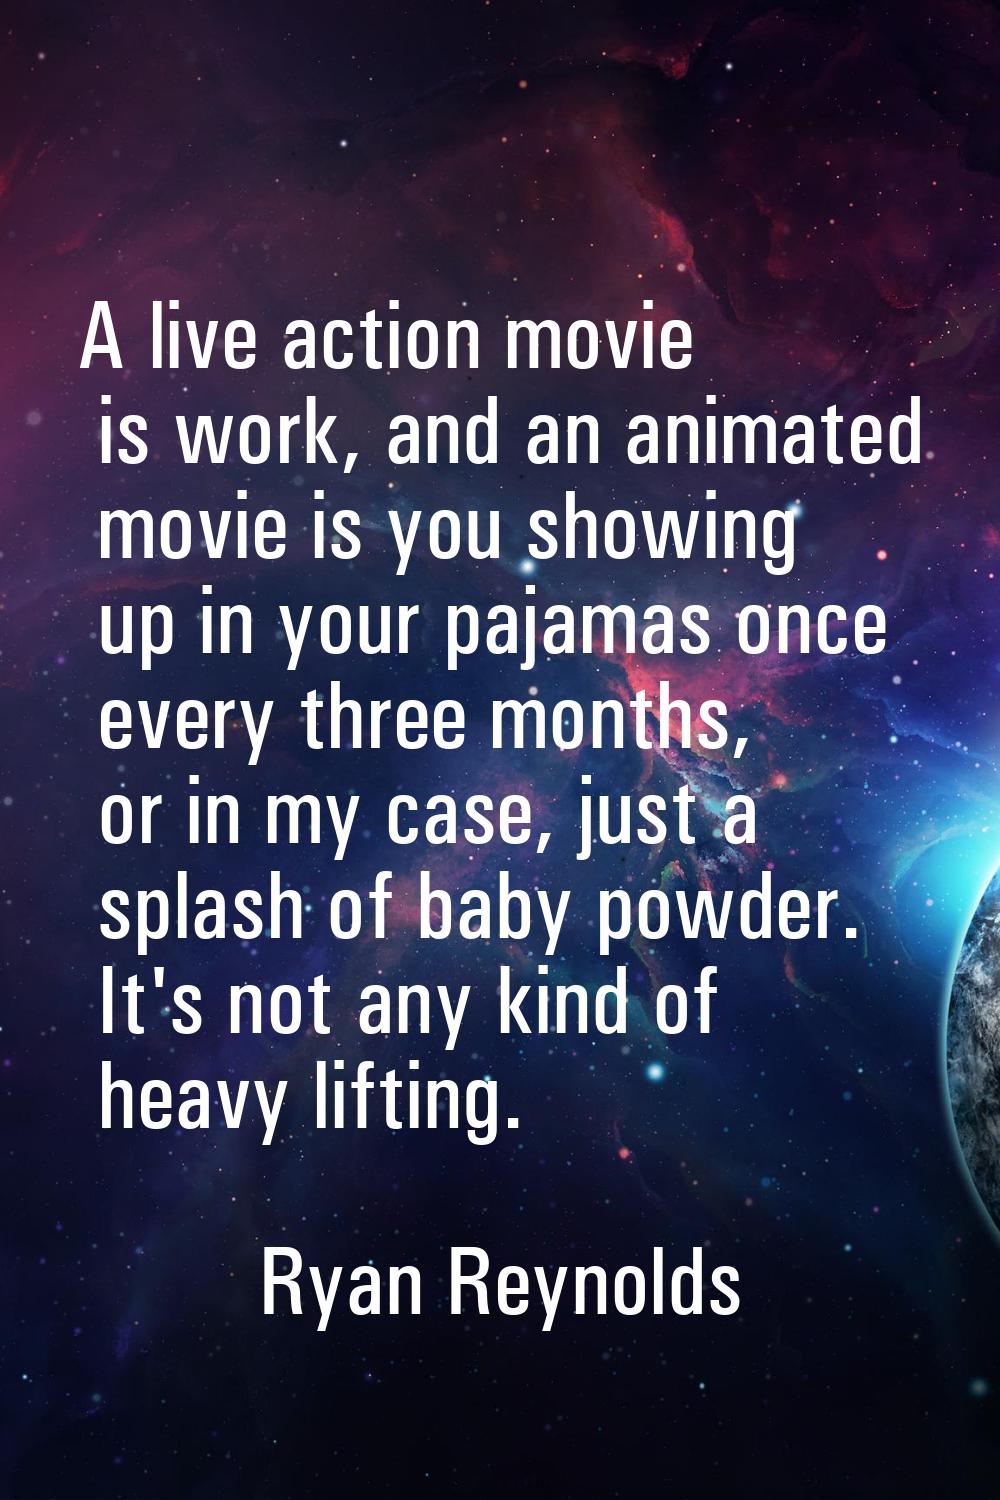 A live action movie is work, and an animated movie is you showing up in your pajamas once every thr